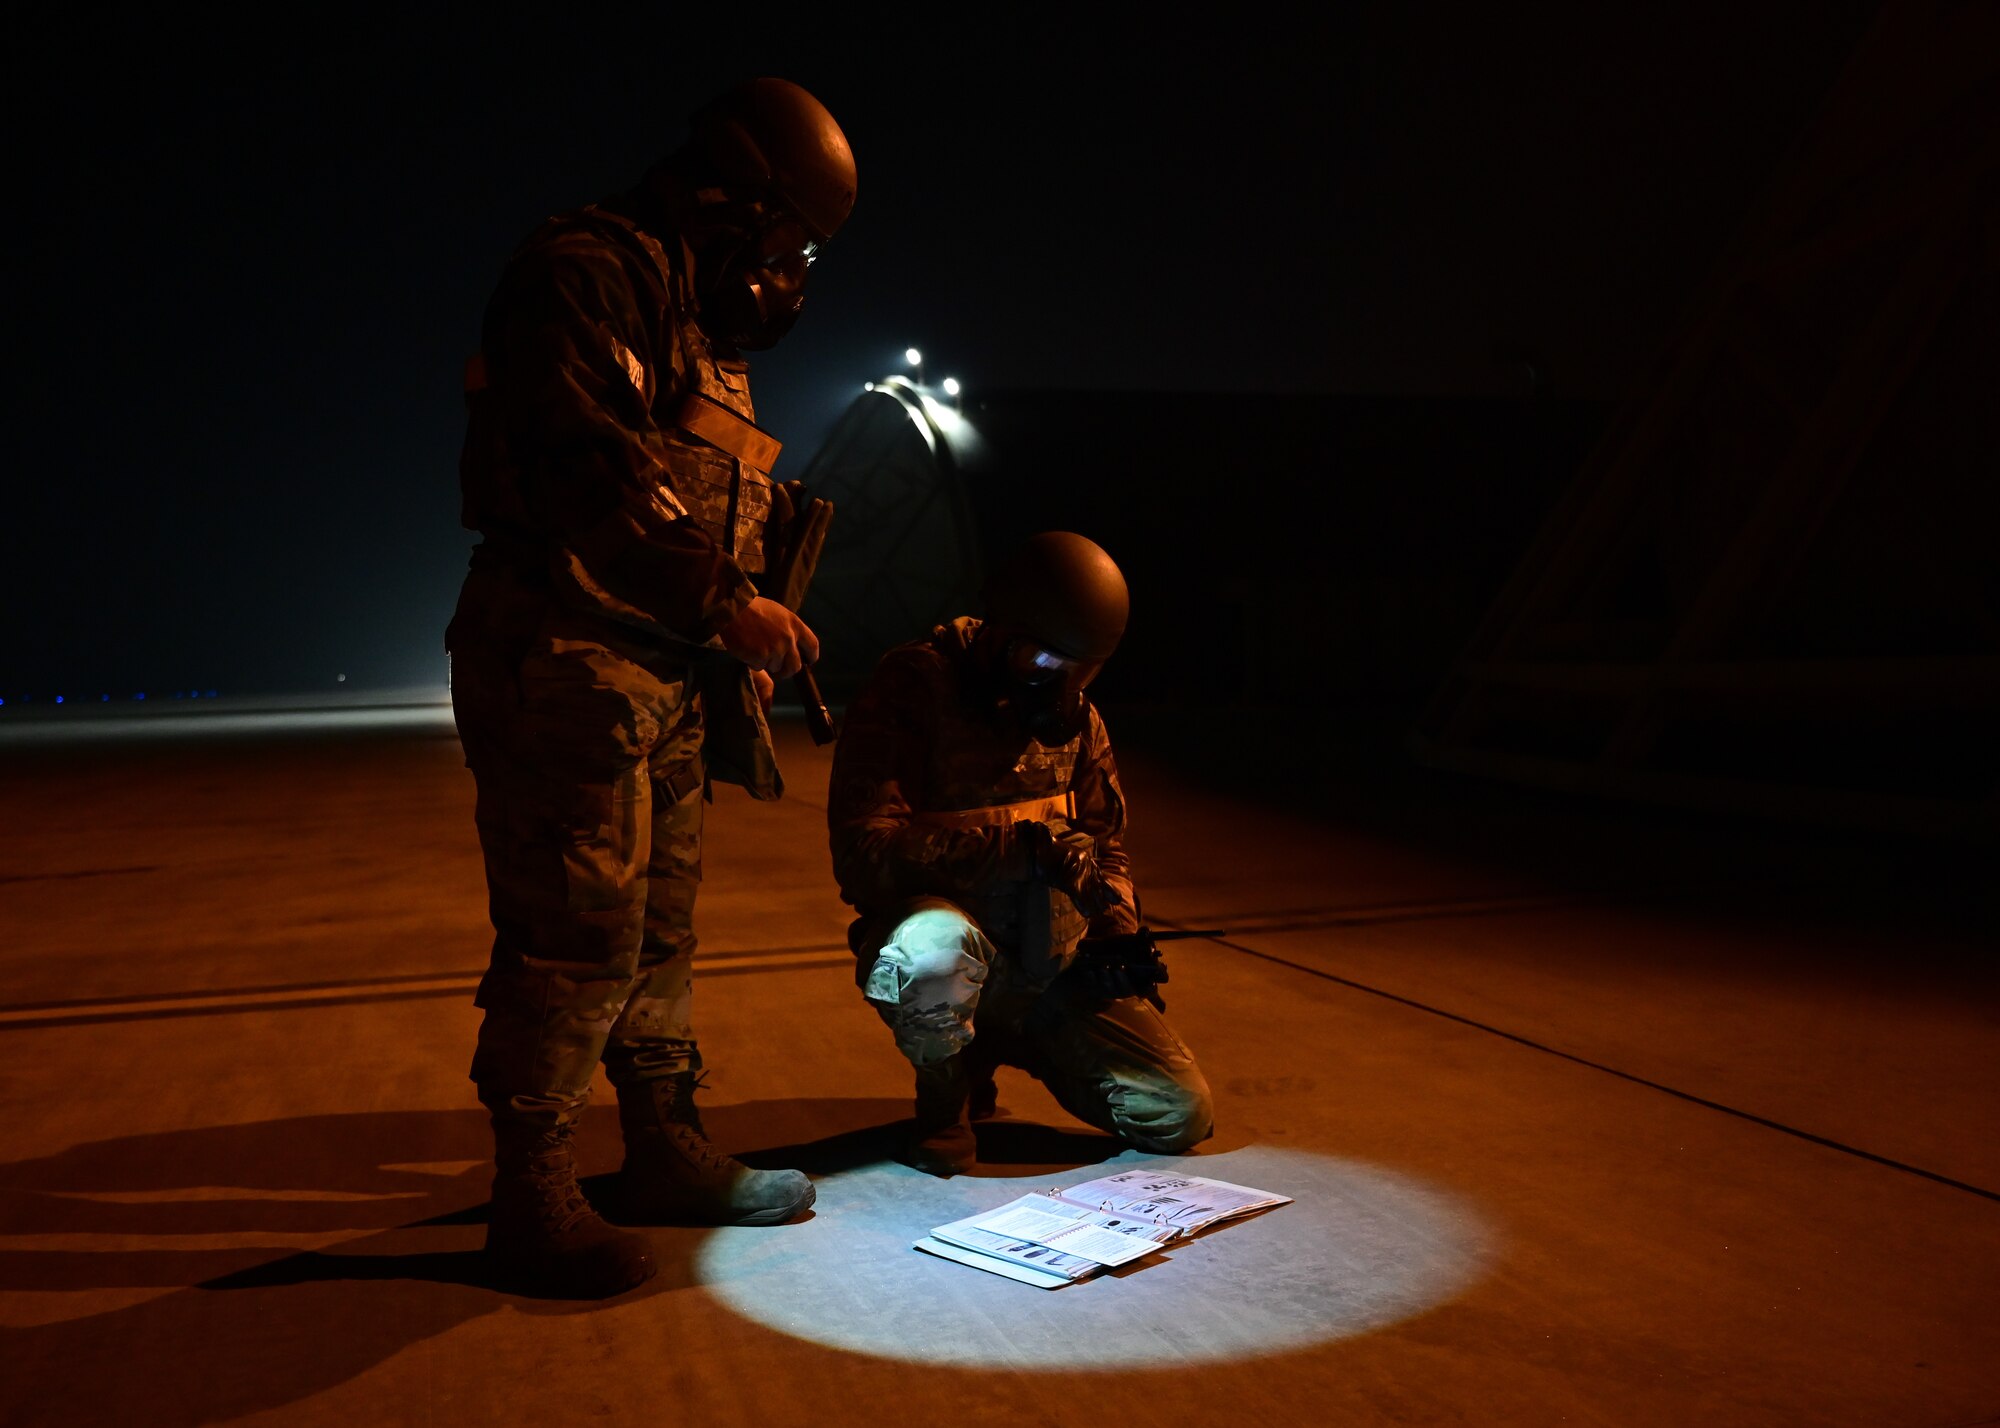 U.S Air Force Master Sgt.’s David Varady (left), 80th Fighter Generation Squadron (FGS) flightline expediter, and Robert Pray, 80th FGS crew chief, examine post-attack reconnaissance sweep checklists during a training event at Kunsan Air Base, Republic of Korea, Feb. 6, 2023. During the training, the 80th FGS Airmen were evaluated on their ability to respond to a simulated unexploded ordnance and return the flightline to normal operations. (U.S. Air Force photo by Staff Sgt. Isaiah J. Soliz)